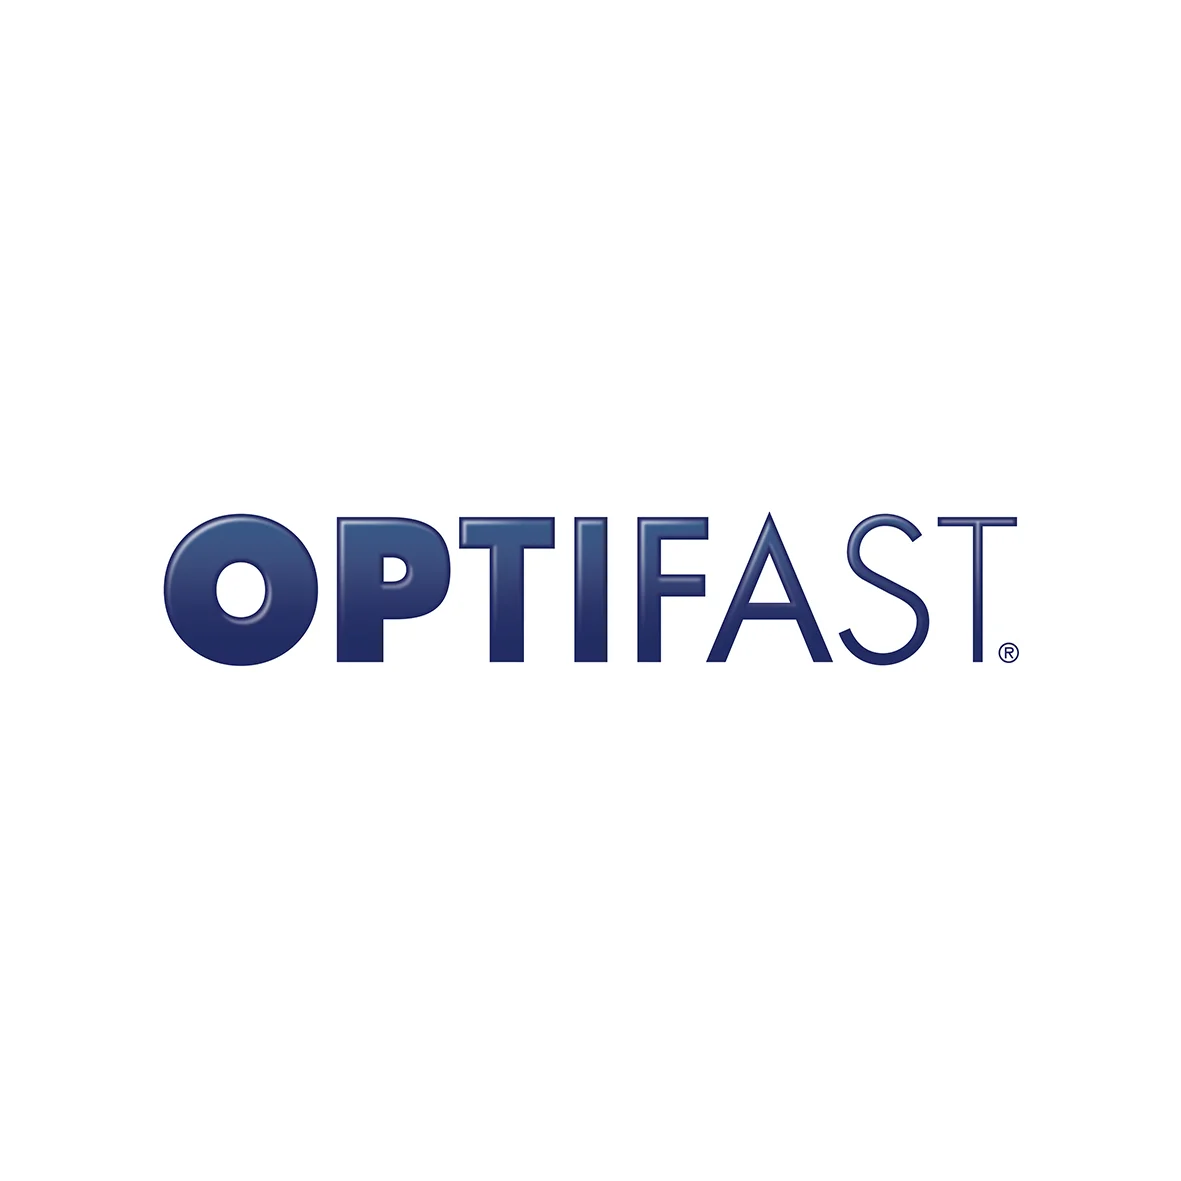 Optifast Coupons & Promo Codes